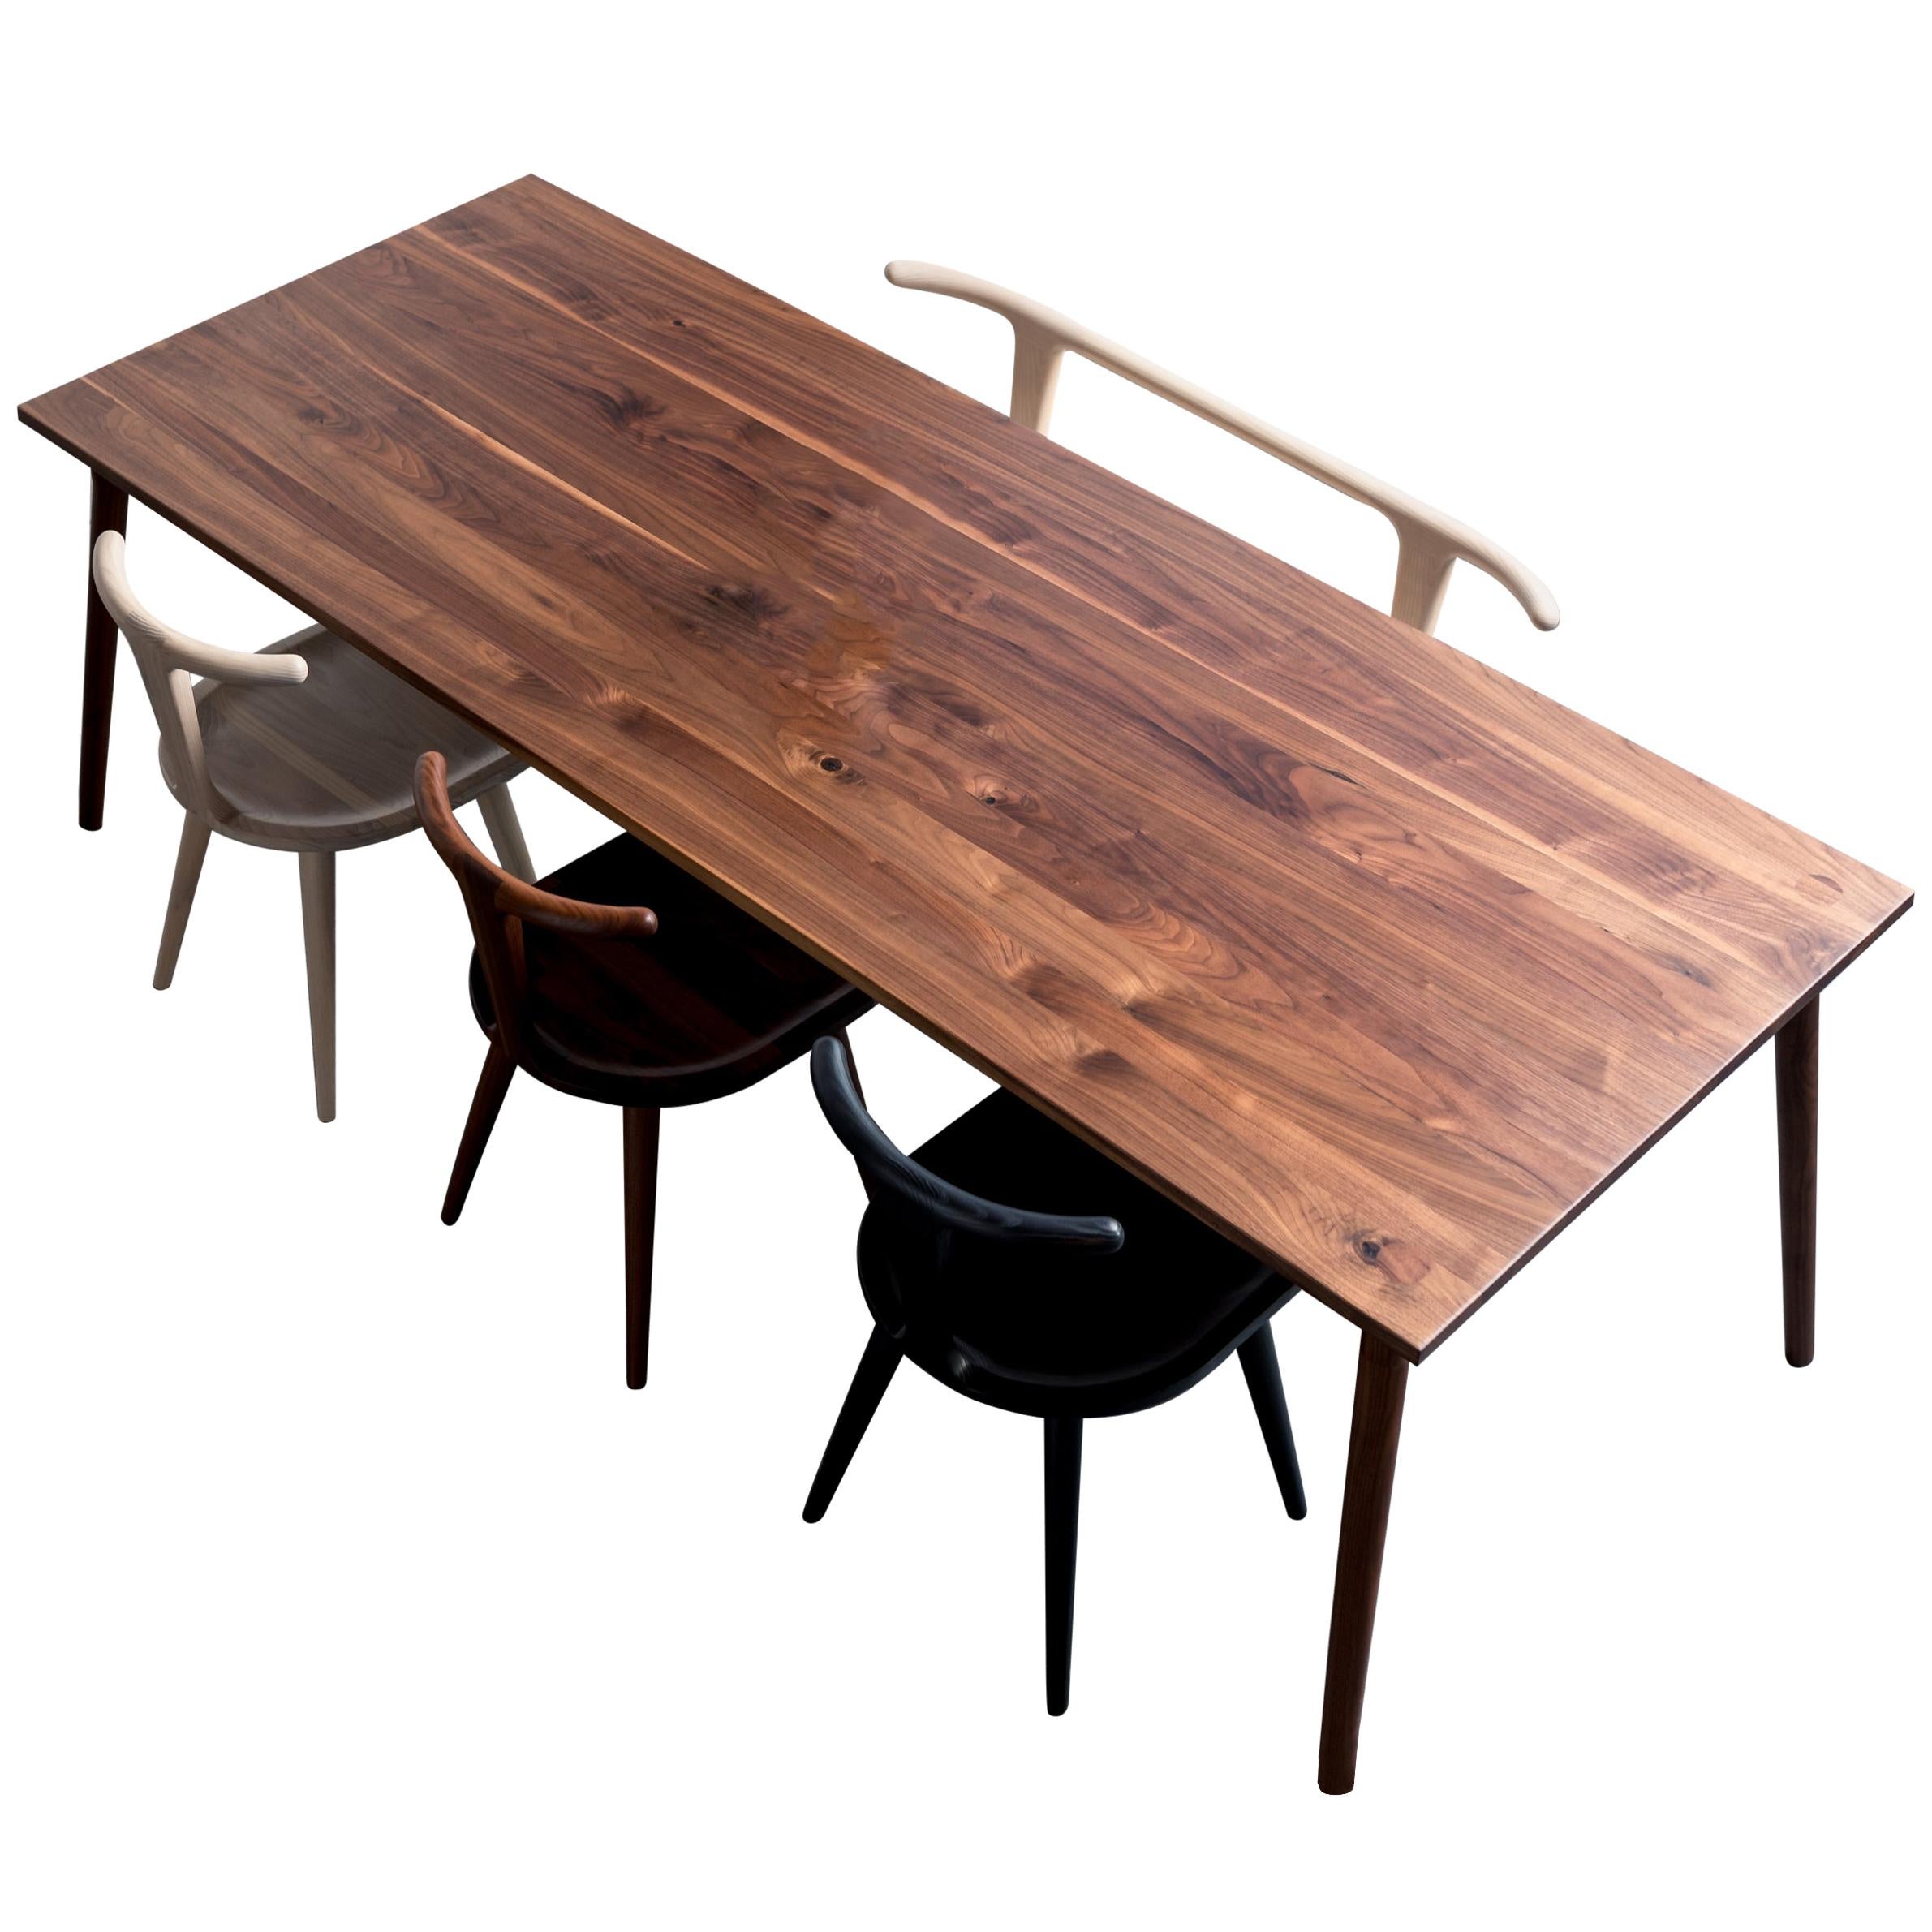 Dining Table, American Walnut Wood Minimalist Handcrafted Kitchen Table